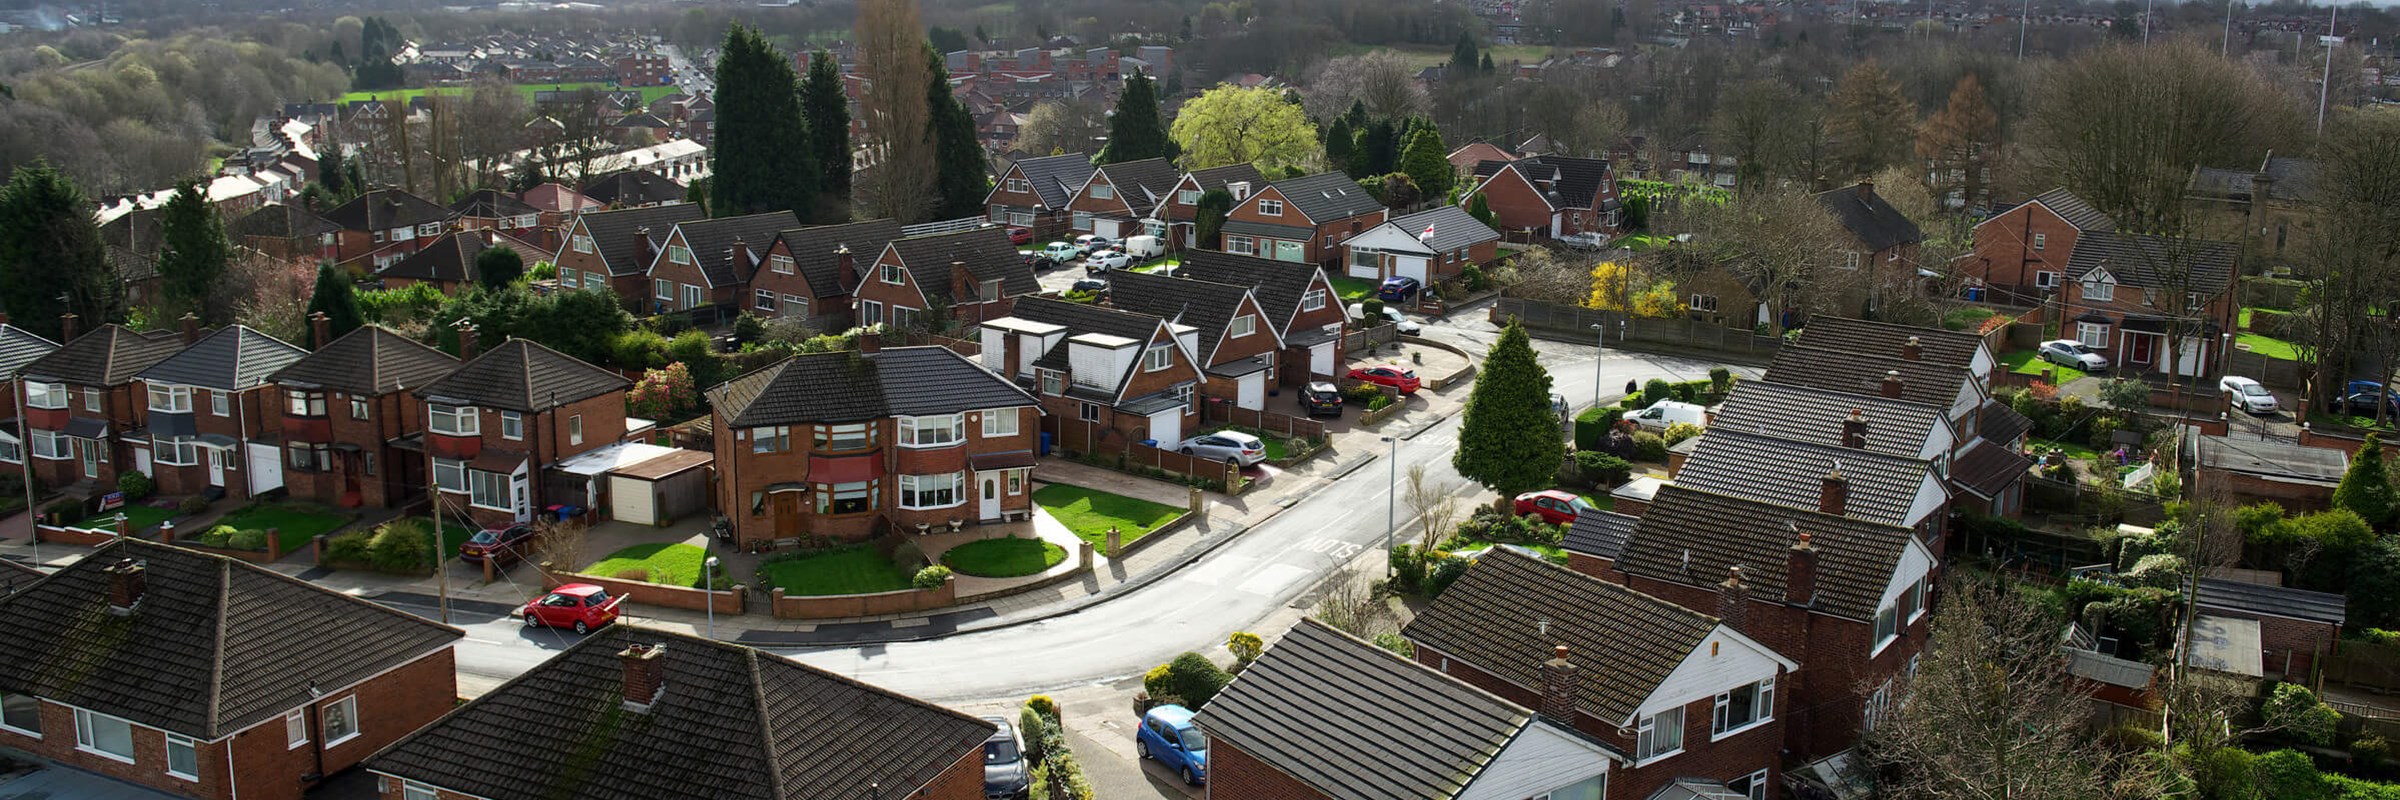 Picture taken from above showing houses on a street.